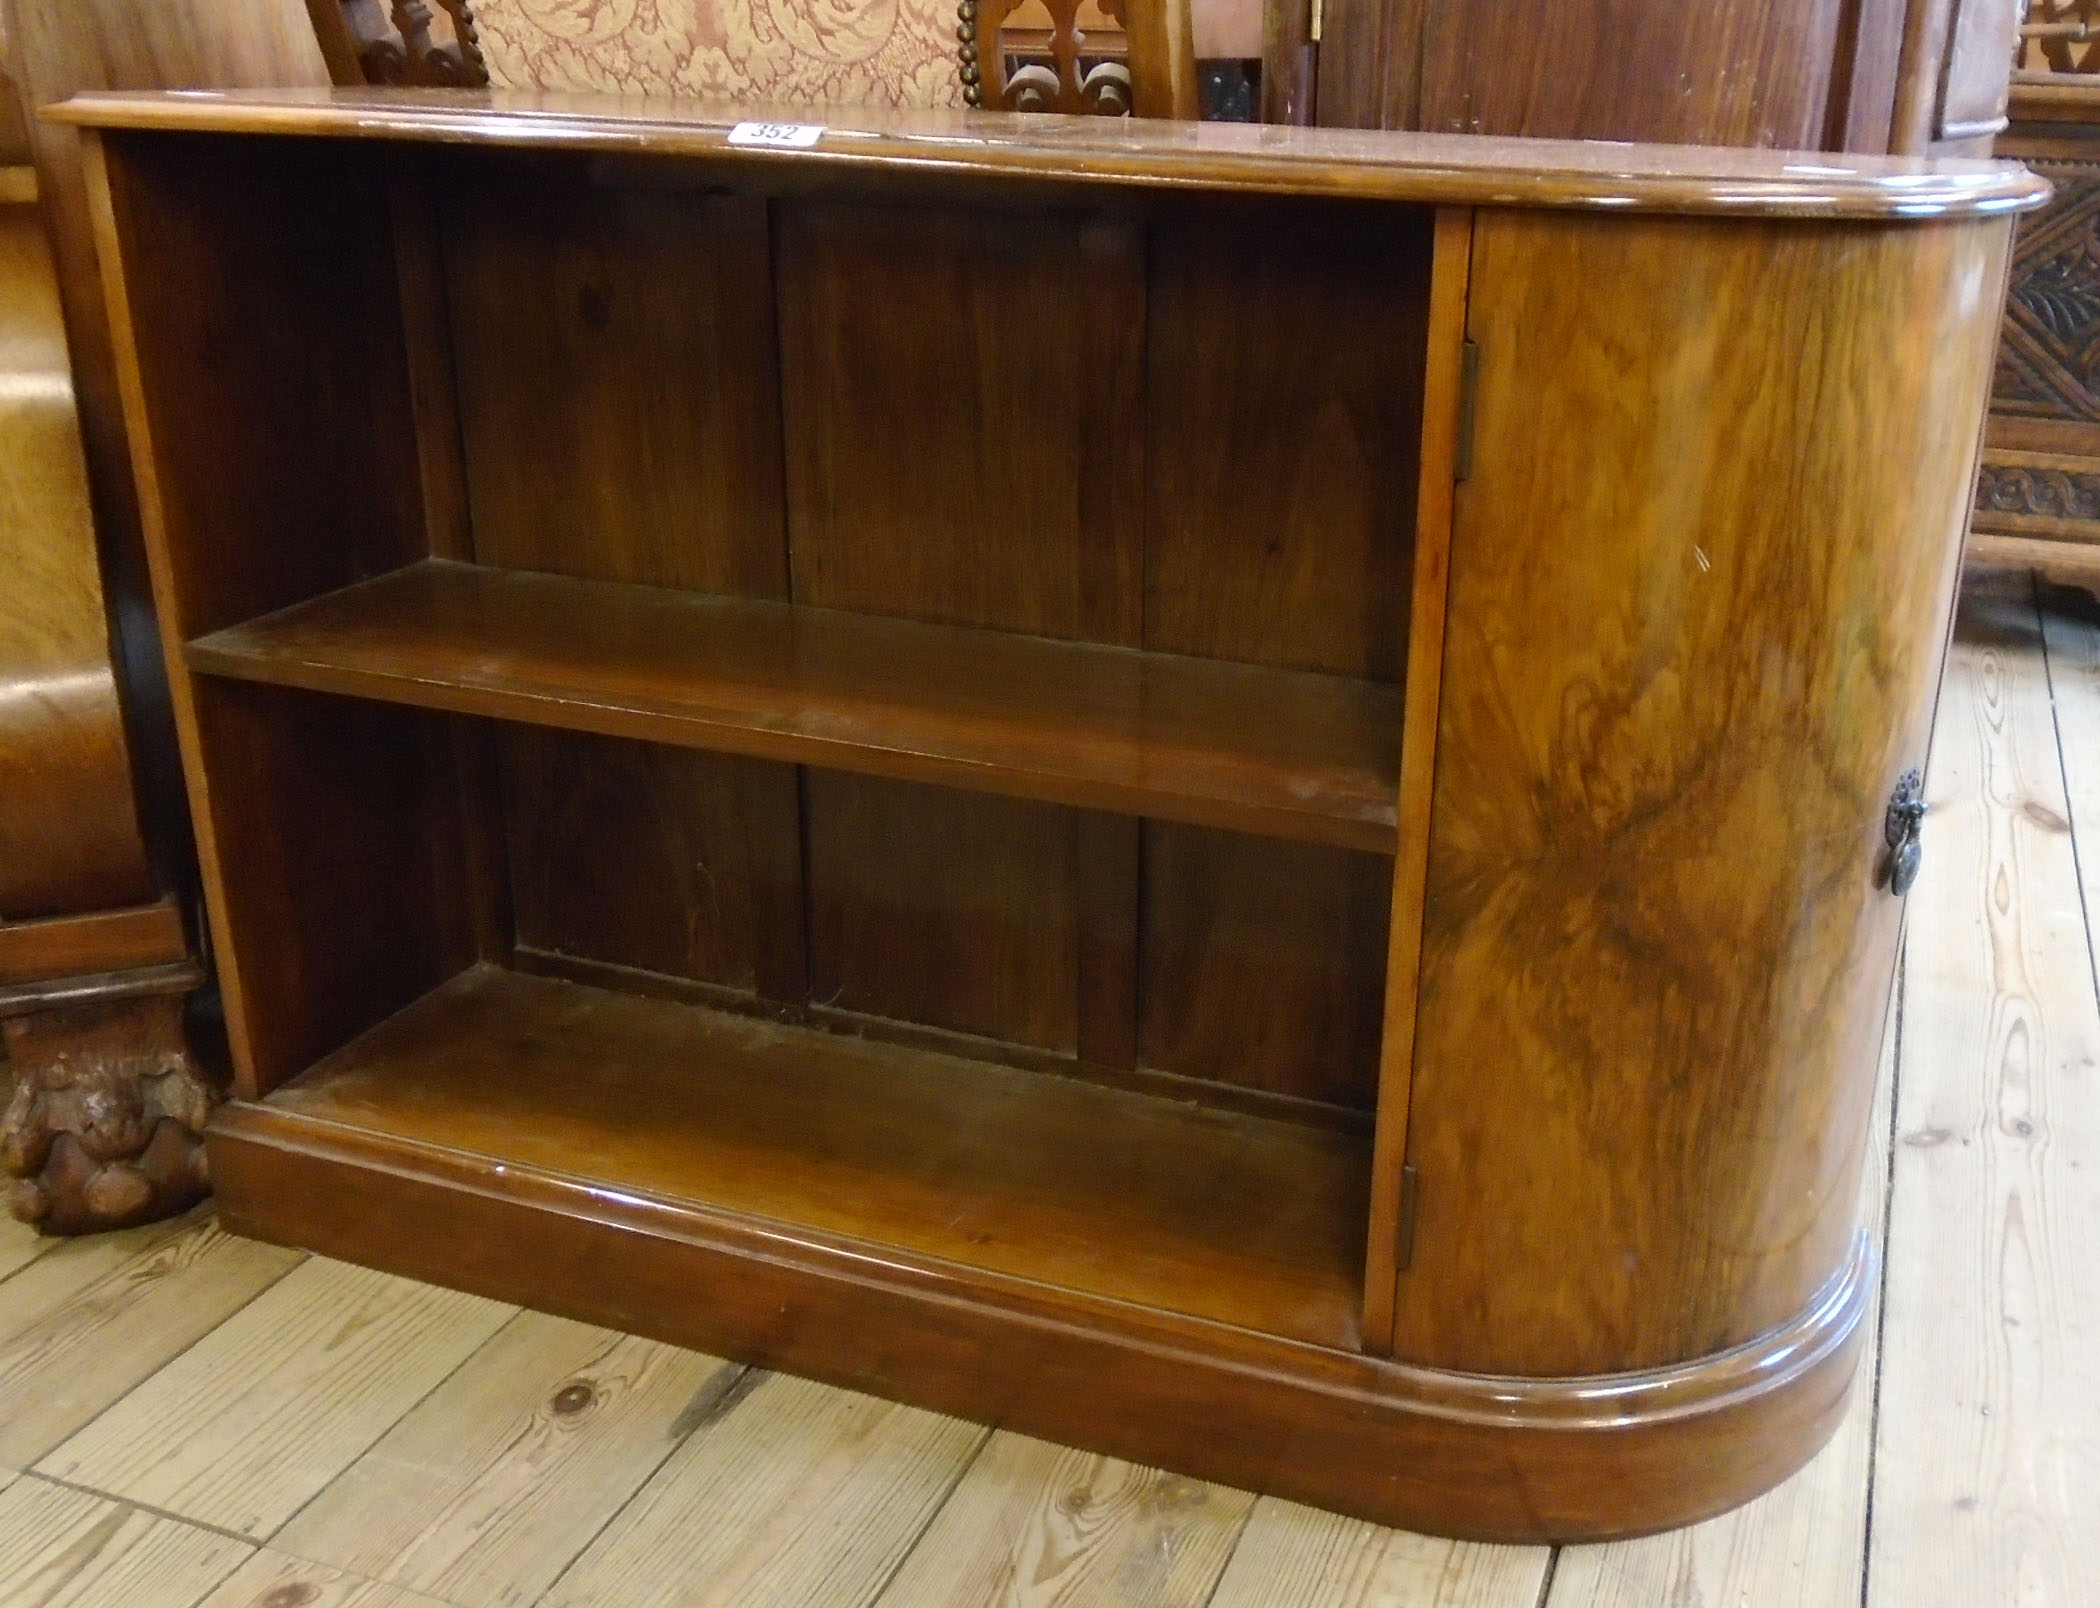 A pair of 35" 1930's walnut bedside units, each with two open shelves and curved ends enclosed by